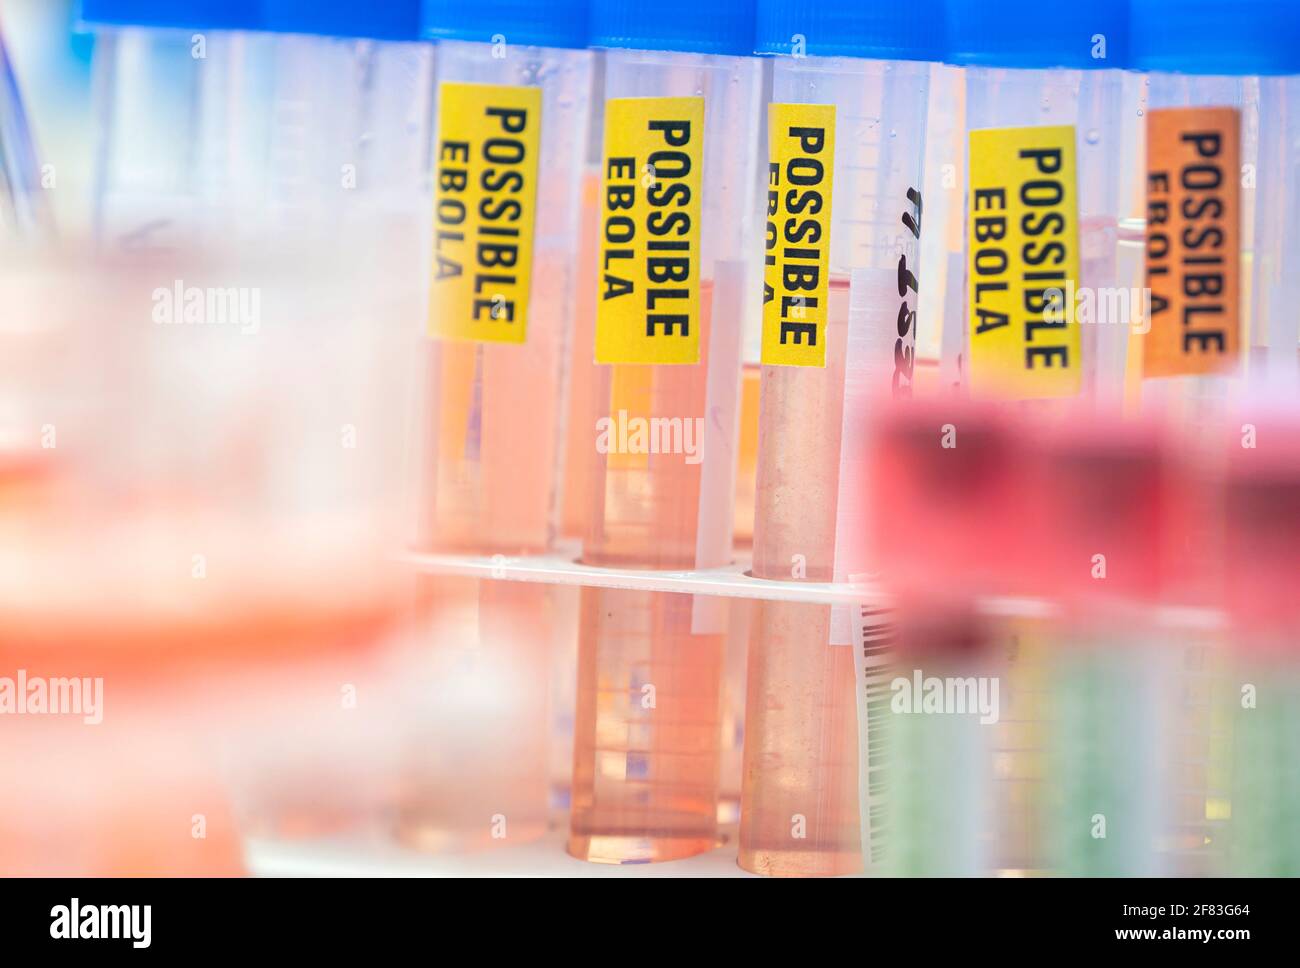 Sample vials of blood from possible Ebola patients infected with new Zaire strain of Ebola, concept image Stock Photo